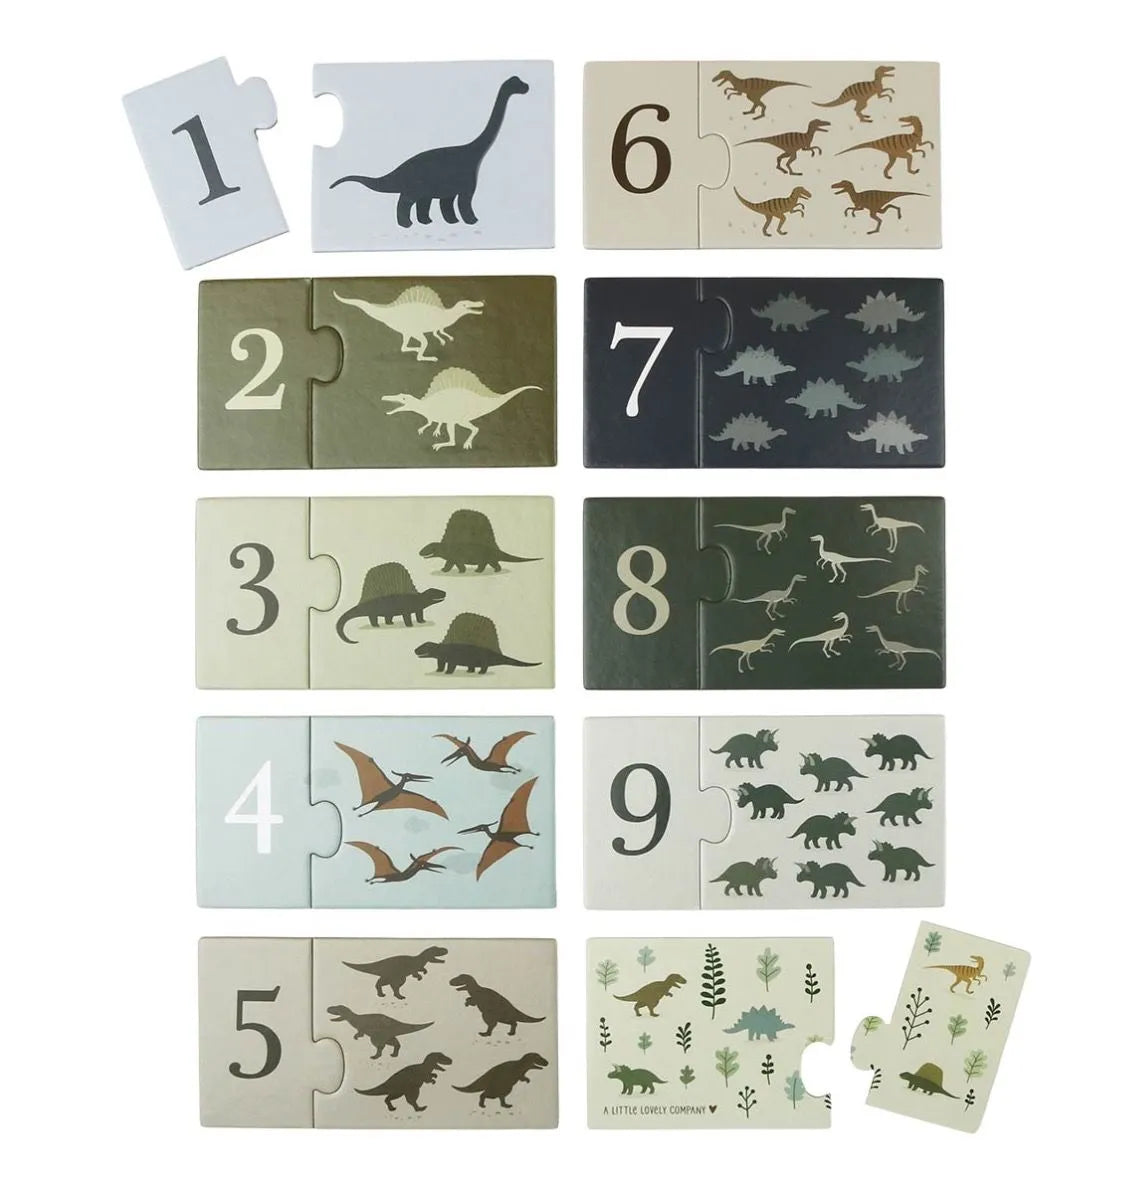 Dinosaurs Counting Puzzle